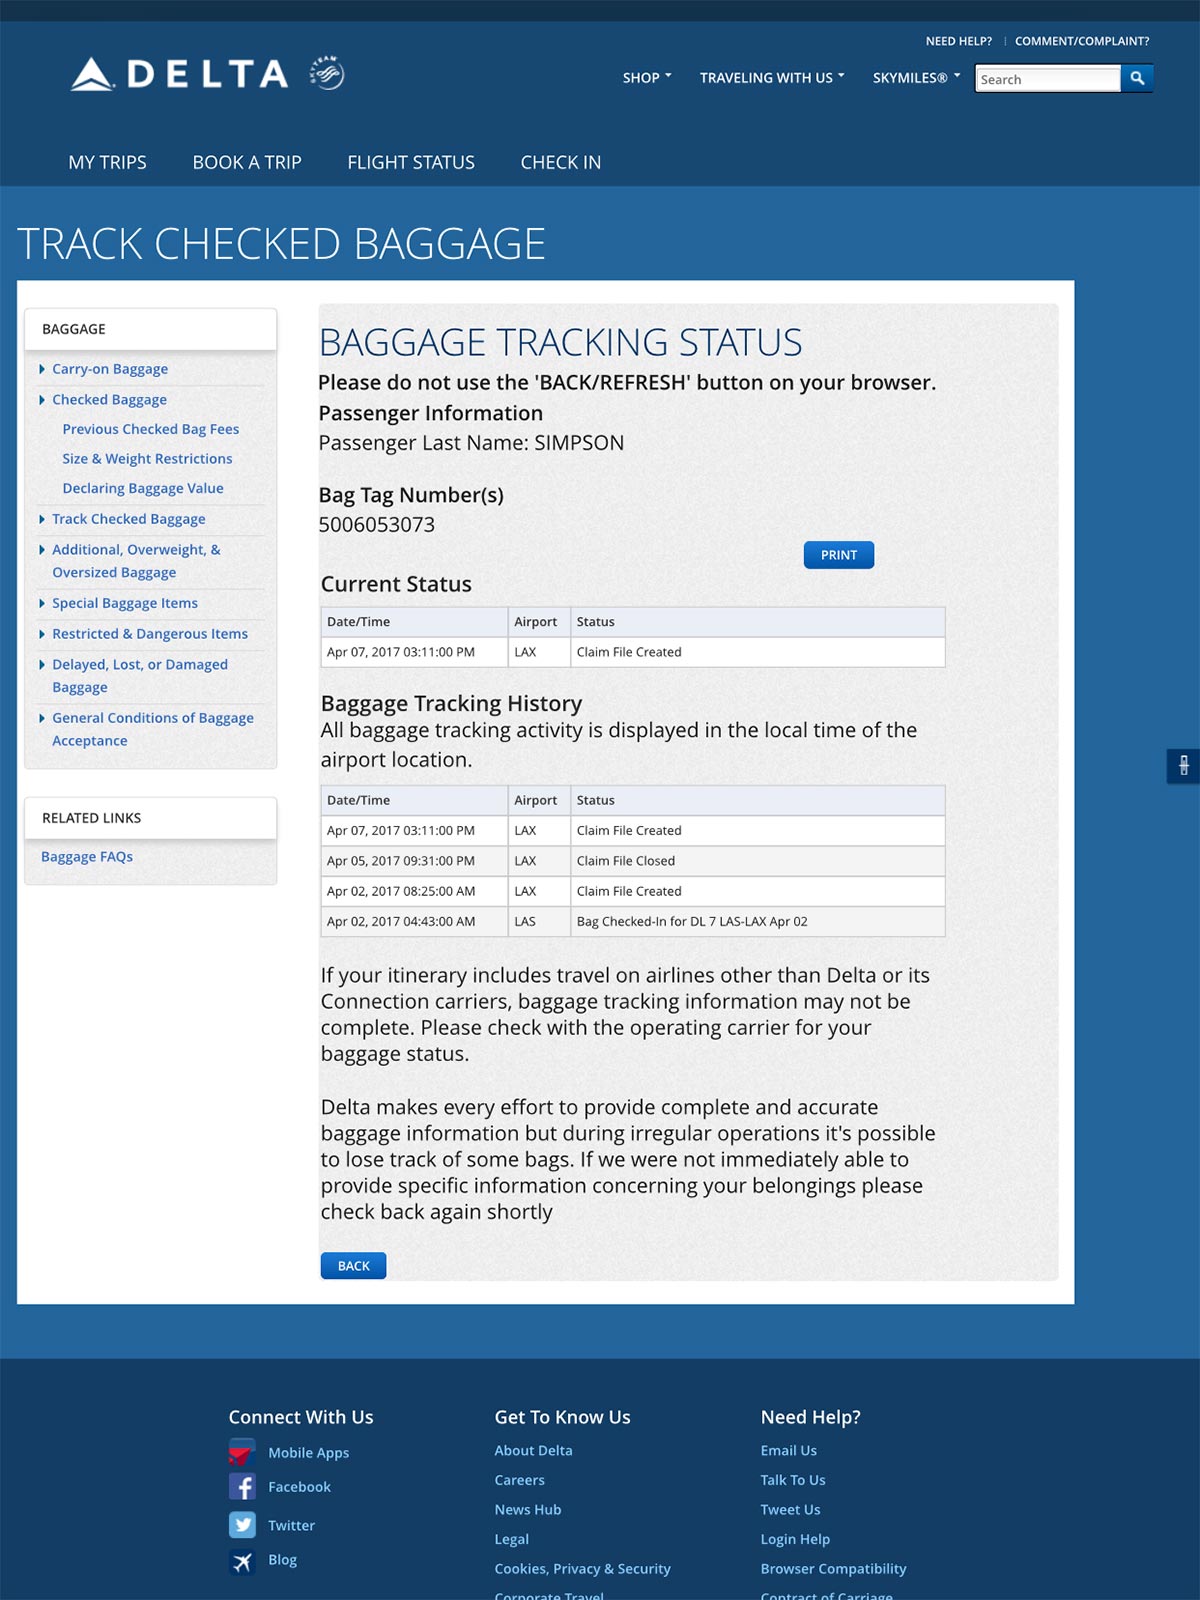 Delta baggage tracking status in L.A., USA. My backpack of 2 years... gone!